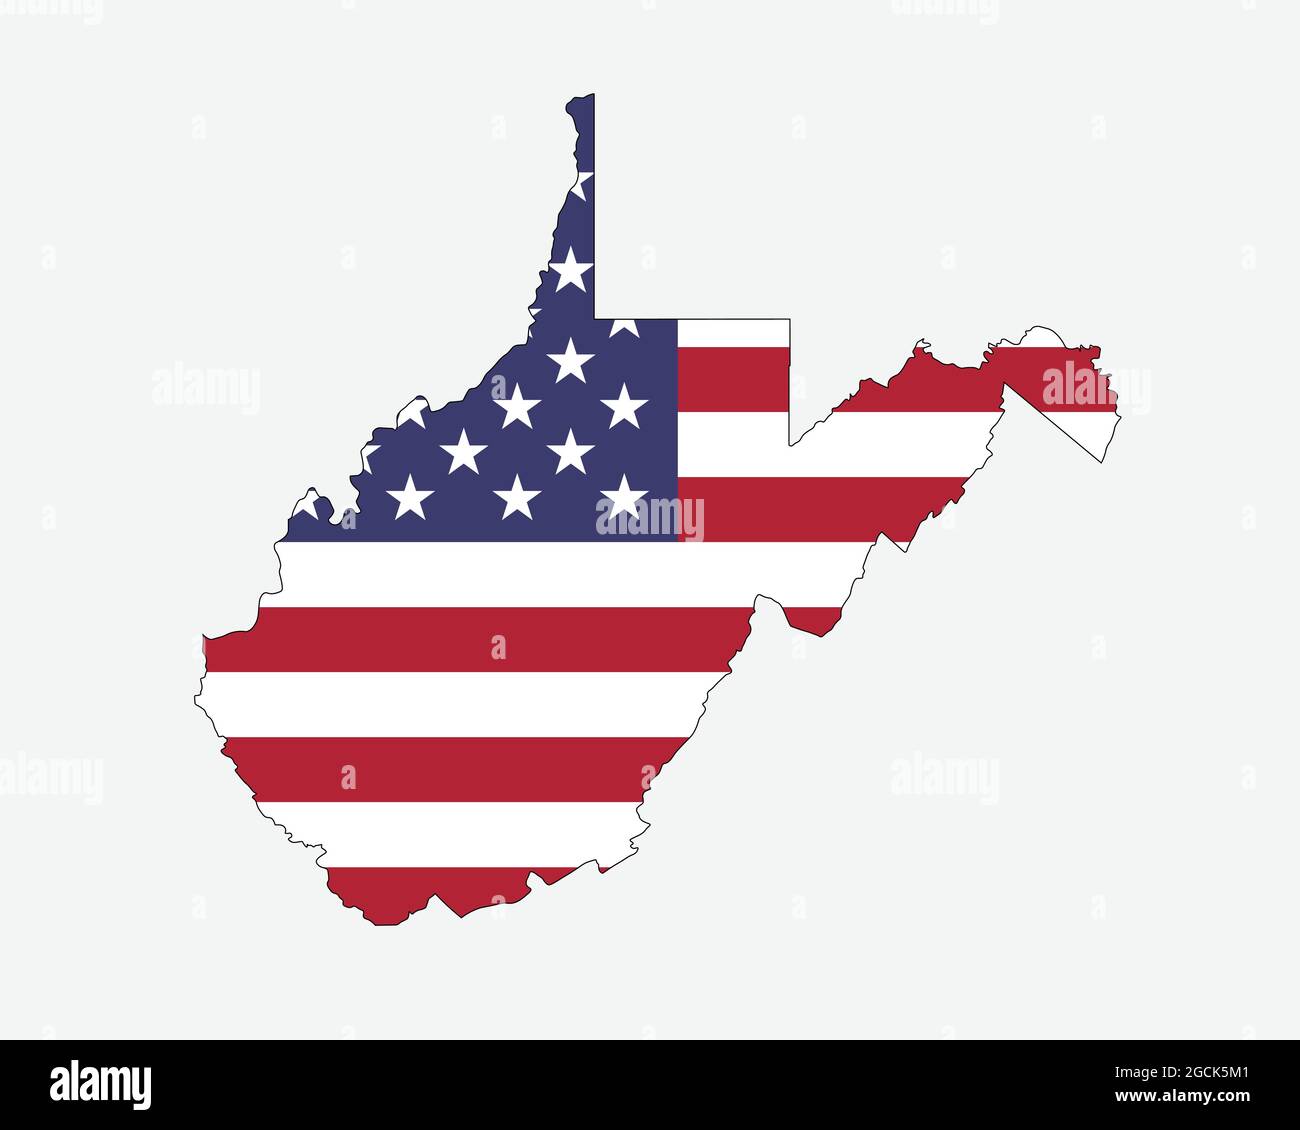 West Virginia Map on American Flag. WV, USA State Map on US Flag. EPS Vector Graphic Clipart Icon Stock Vector